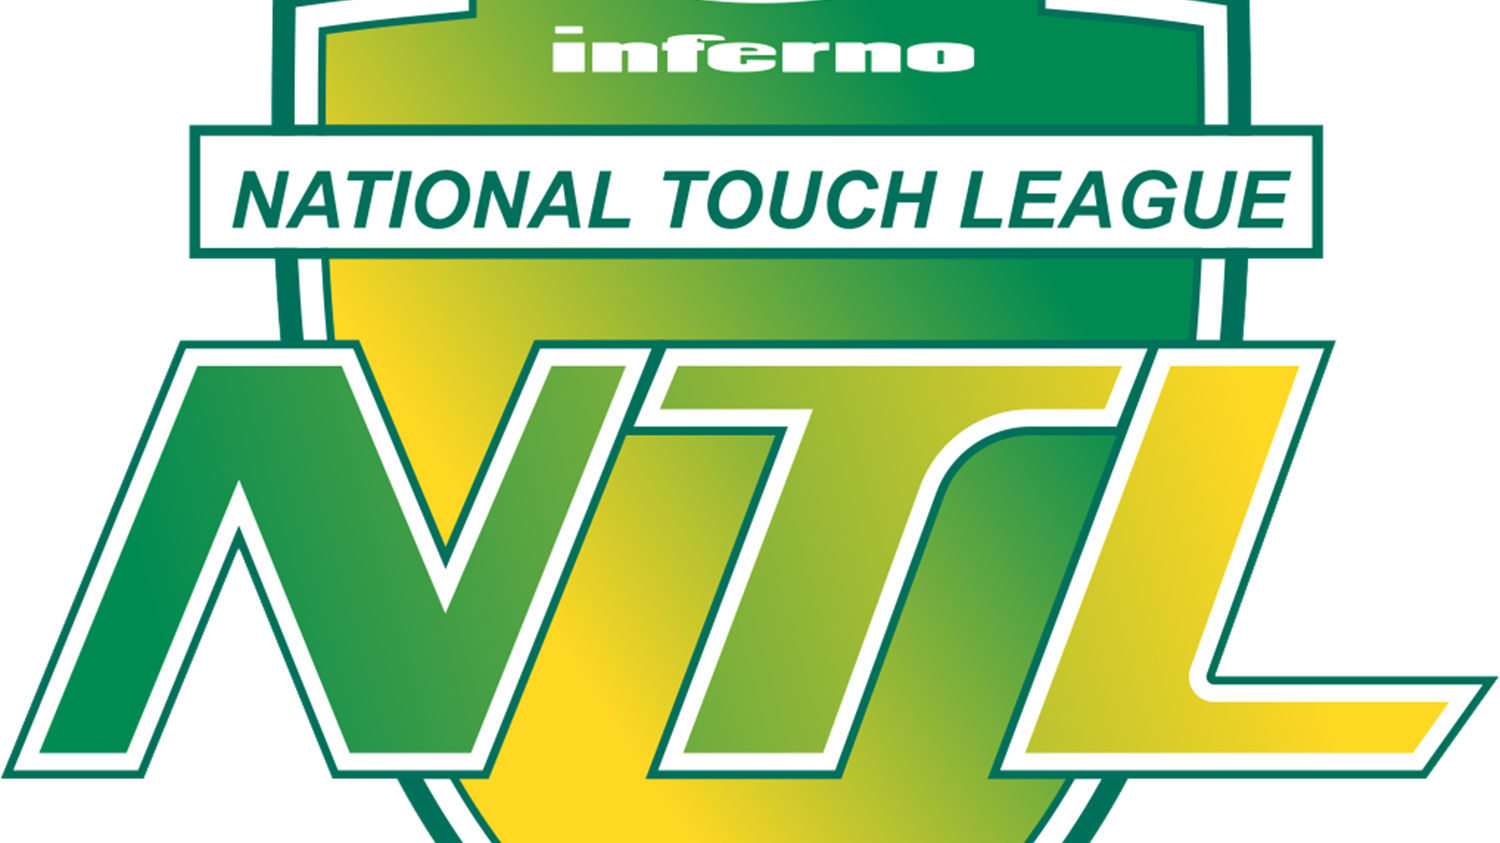 National Touch League DAY 2 - Team 1 v Team 2 Slate Image